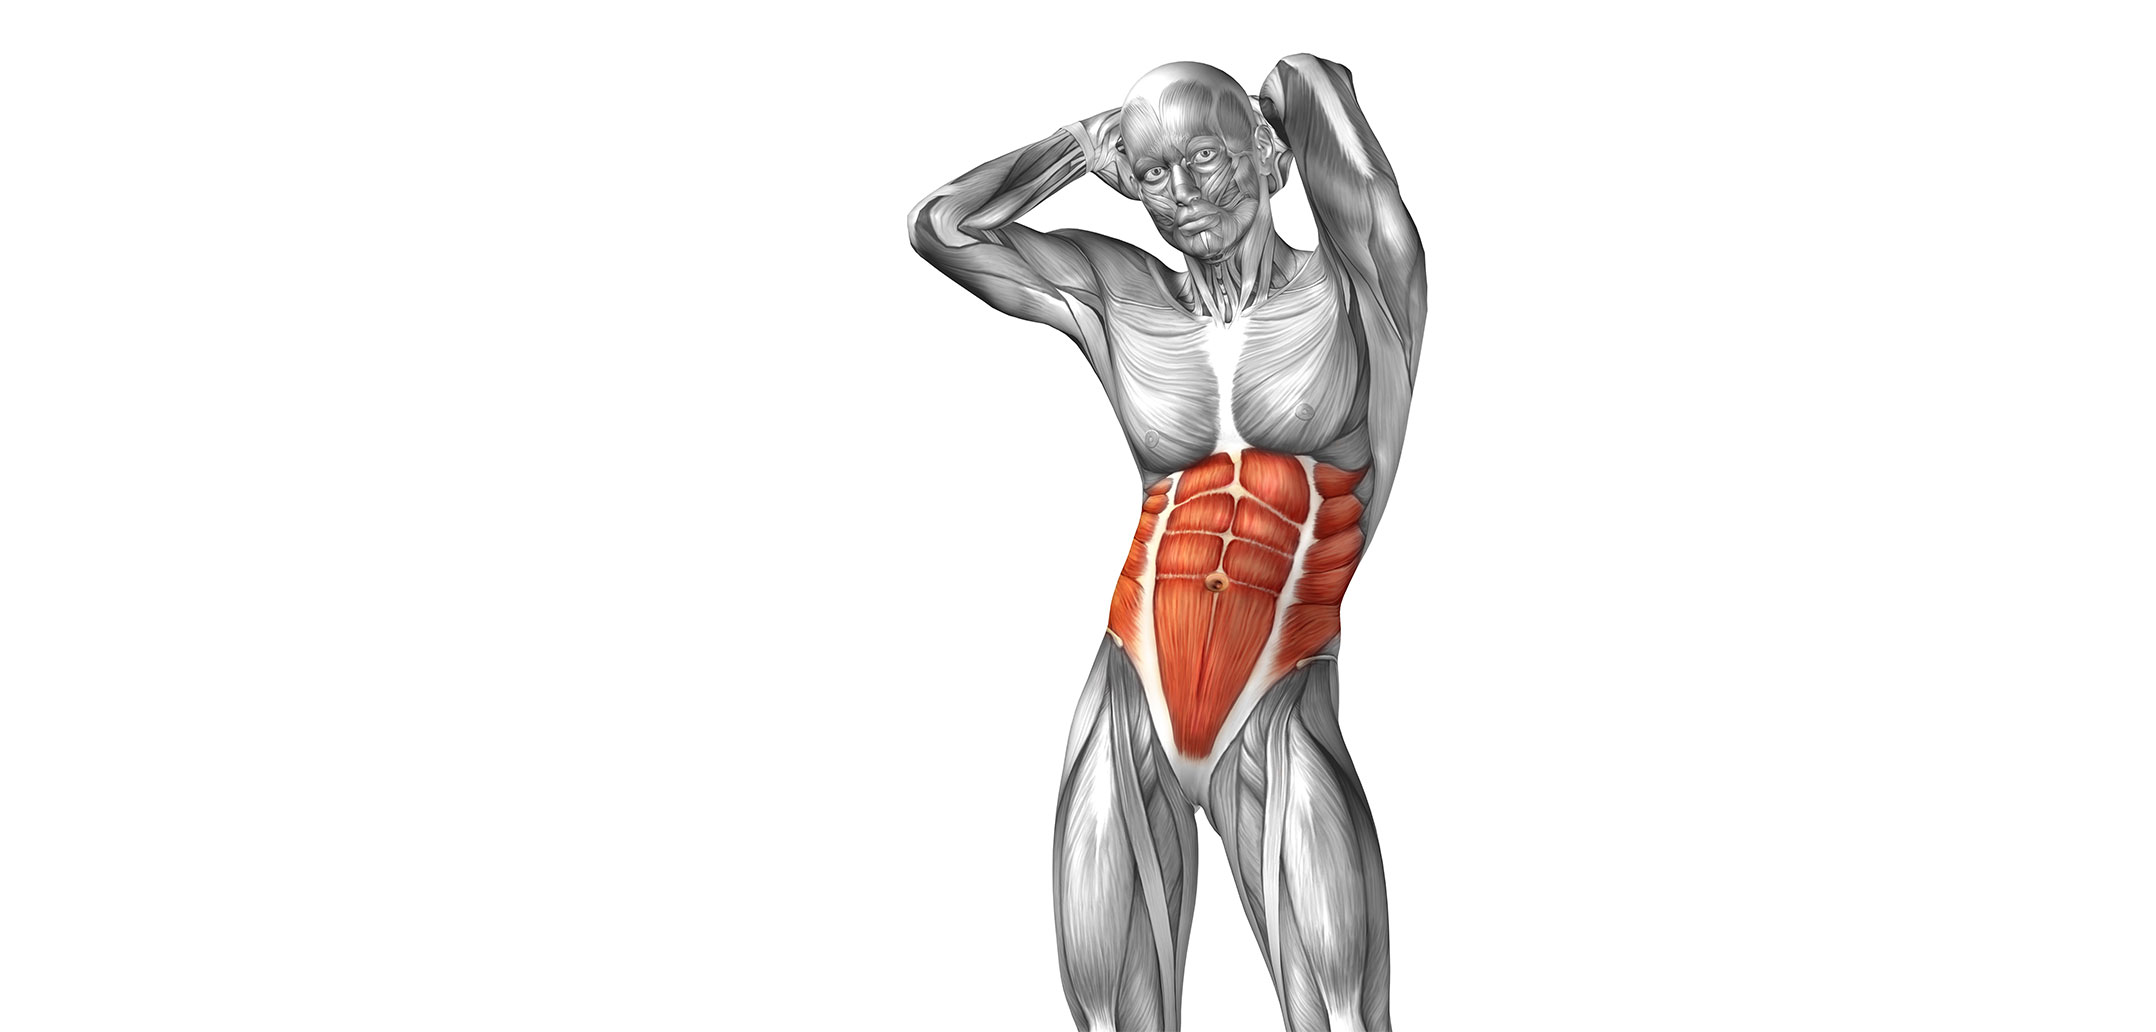 Abdominal Muscles 